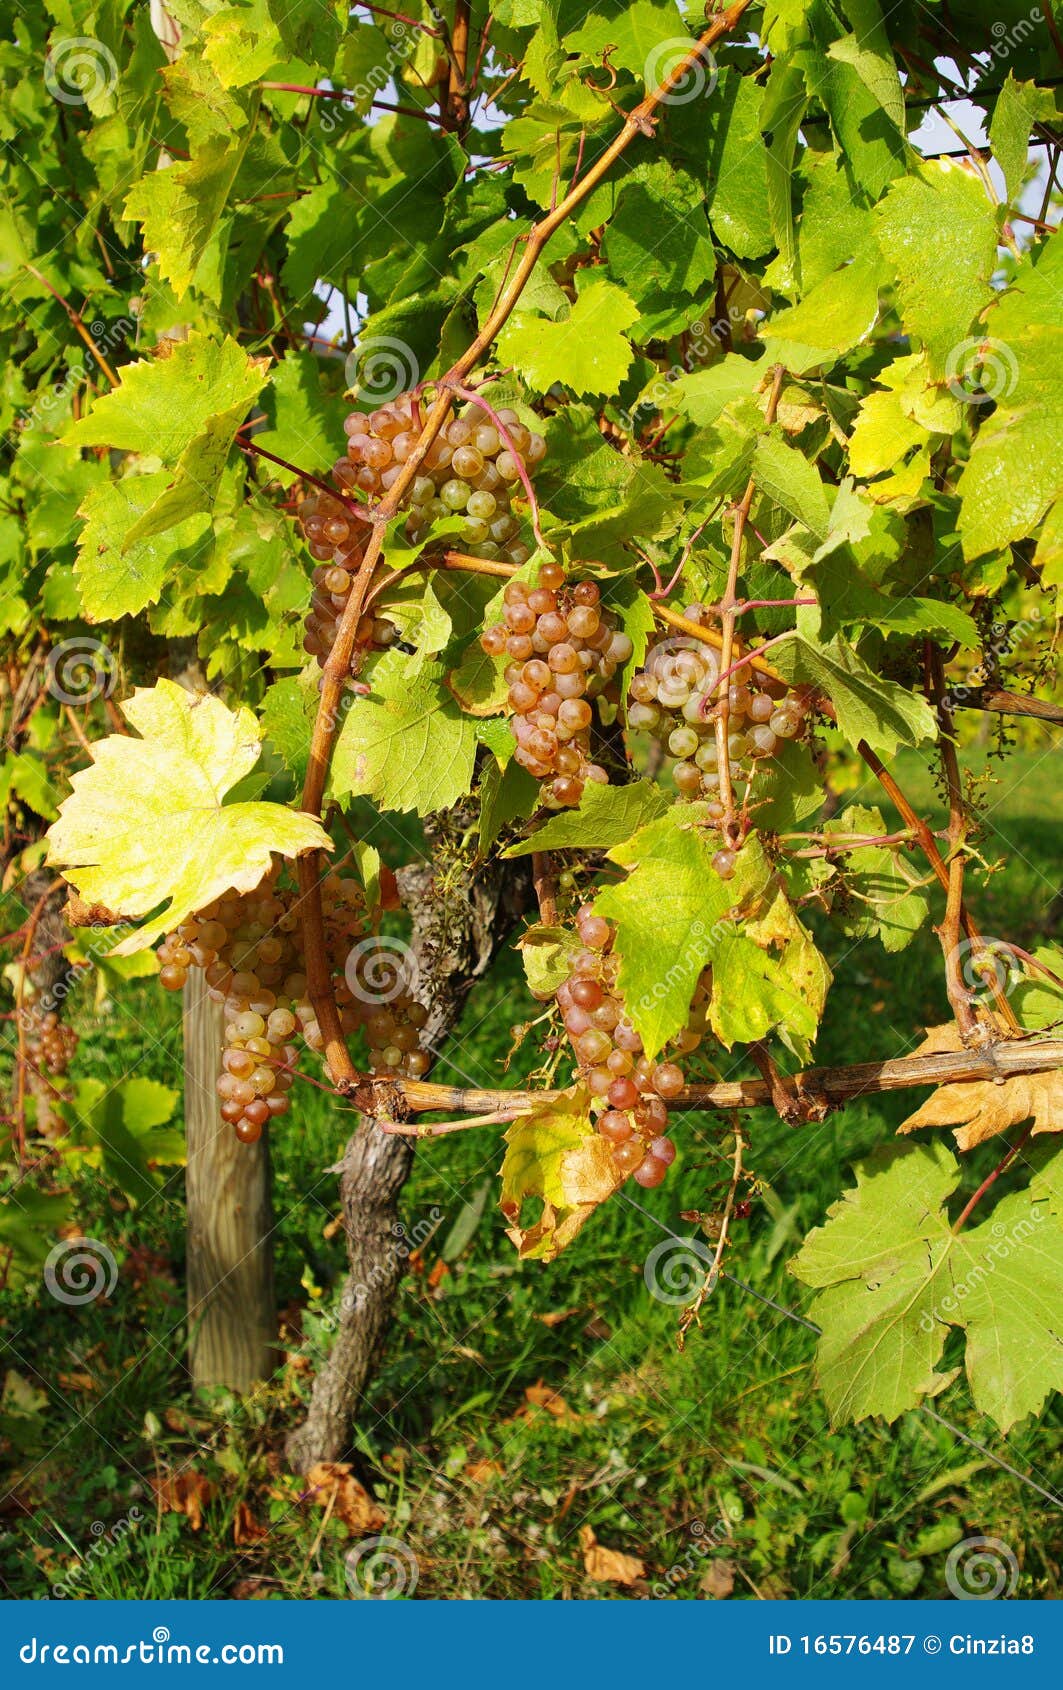 bunch white grapes 16576487